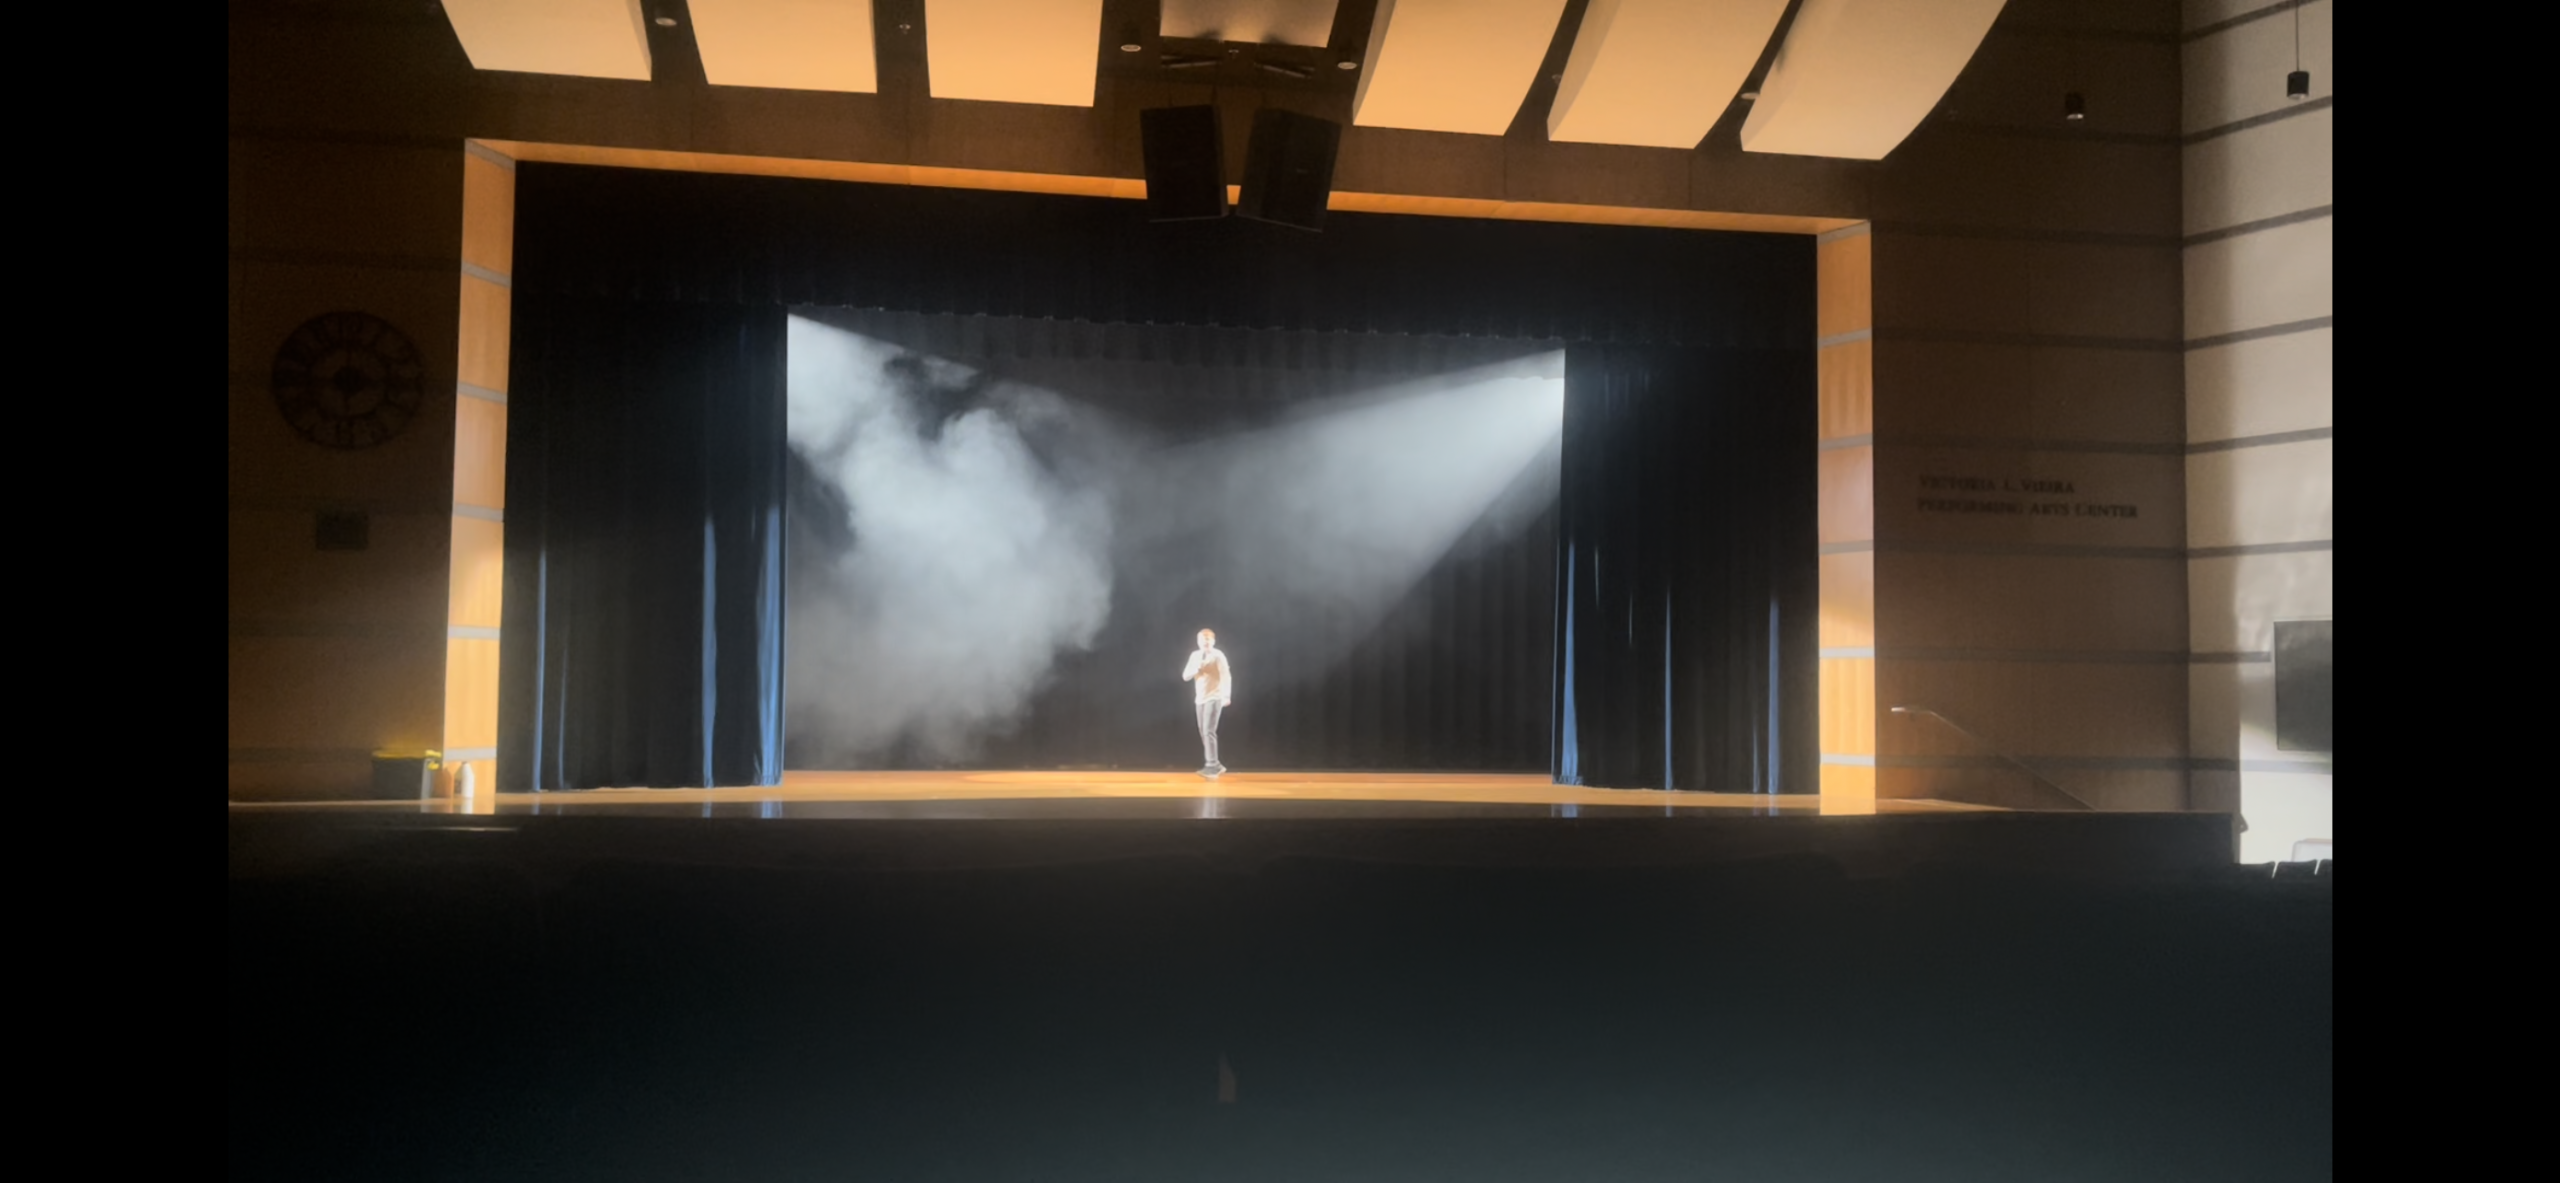 Student singing on the stage while lights and smoke fill the air.